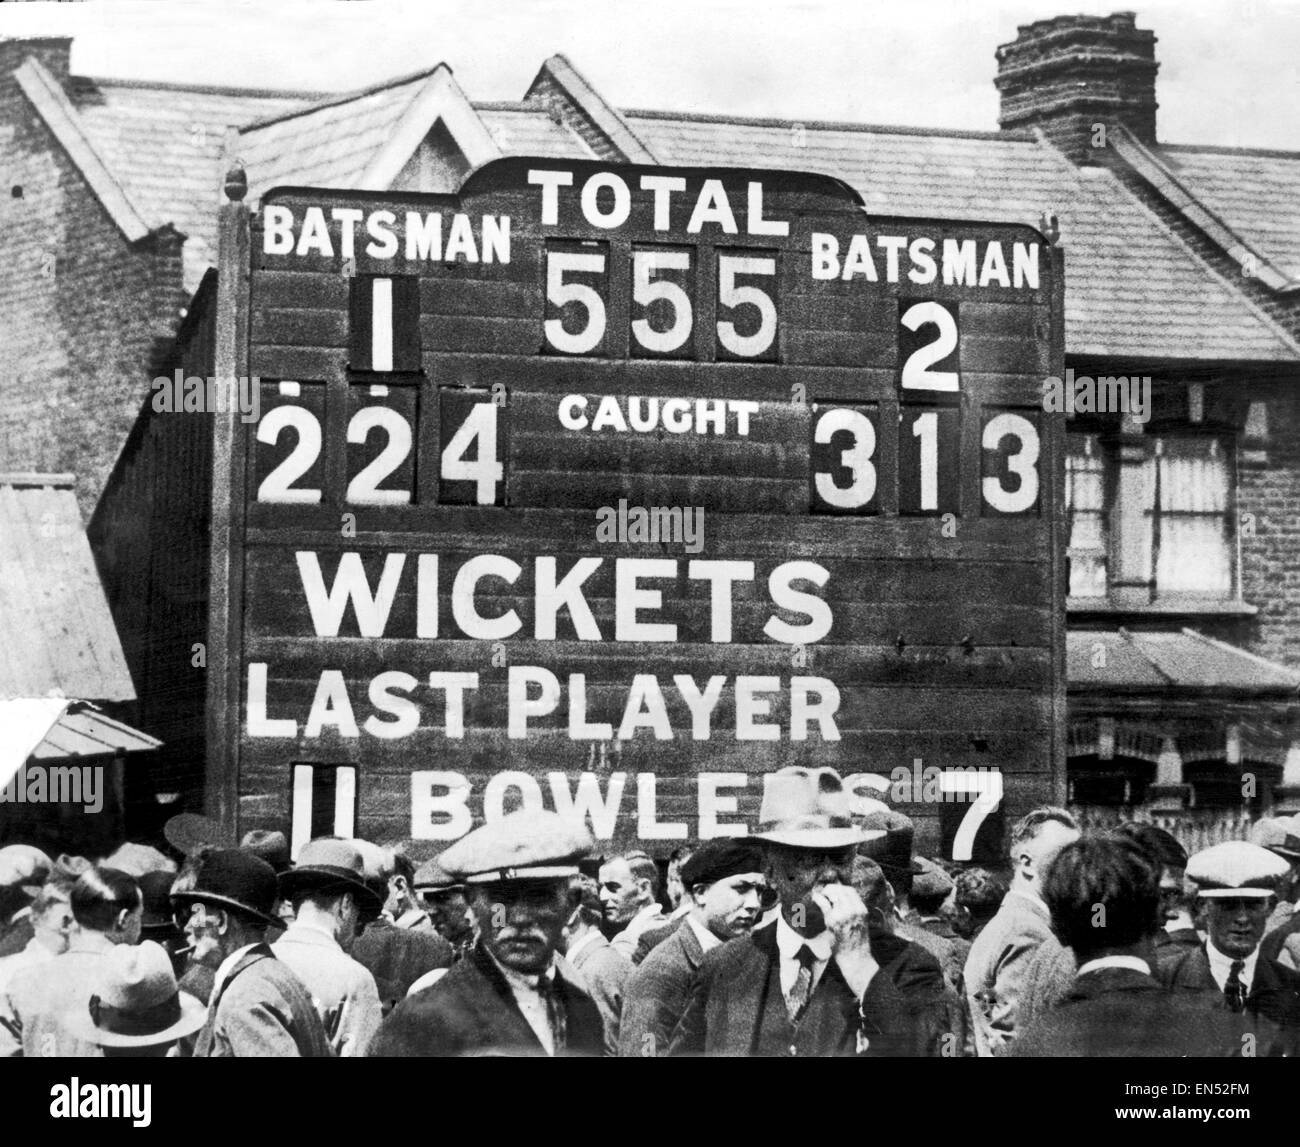 County Championship Cricket. Yorkshire against Essex at County Ground, Leyton on 15th, 16th, 17th June 1932 . Opening batsmen for Yorkshire Percy Holmes and Herbert Sutcliffe set a world record partnership for any wicket of 555. This remained the world re Stock Photo